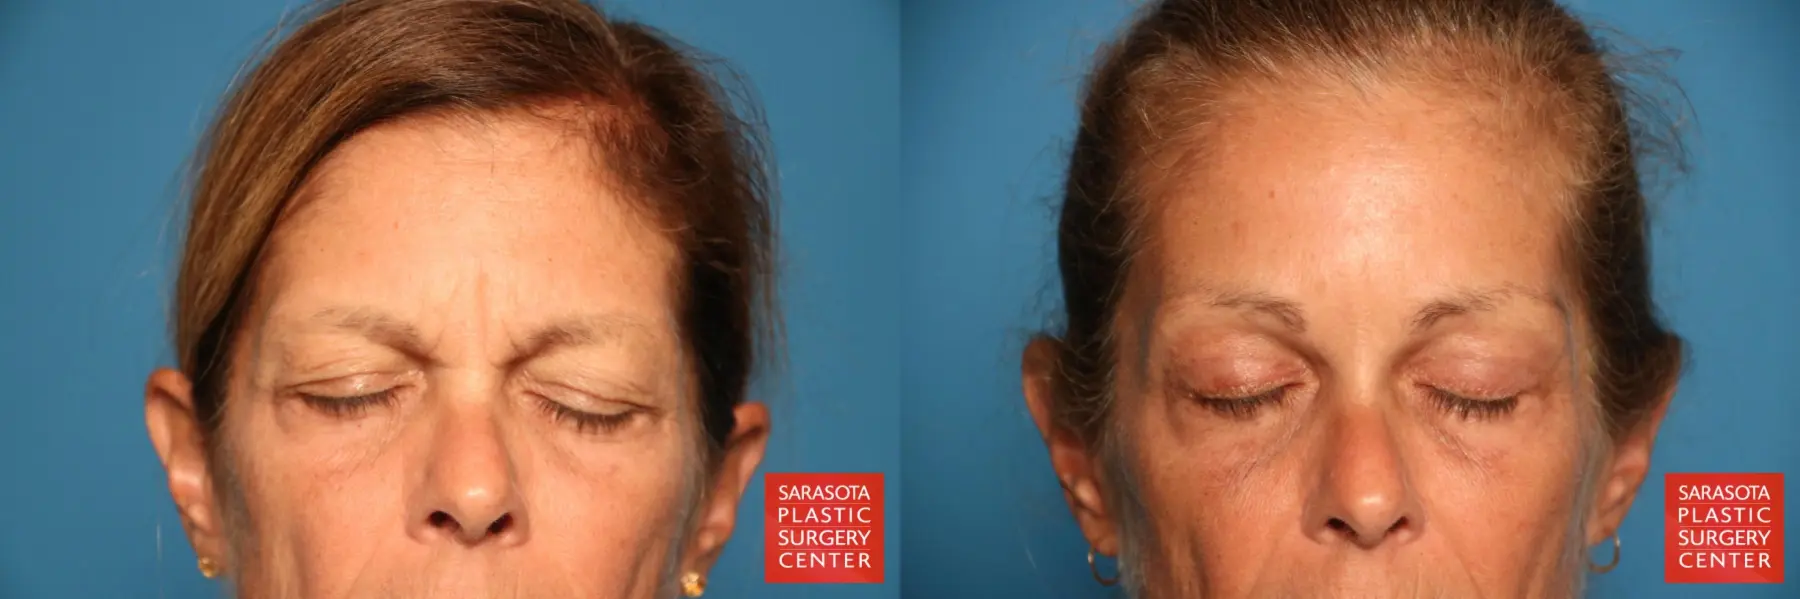 Brow Lift: Patient 2 - Before and After 4